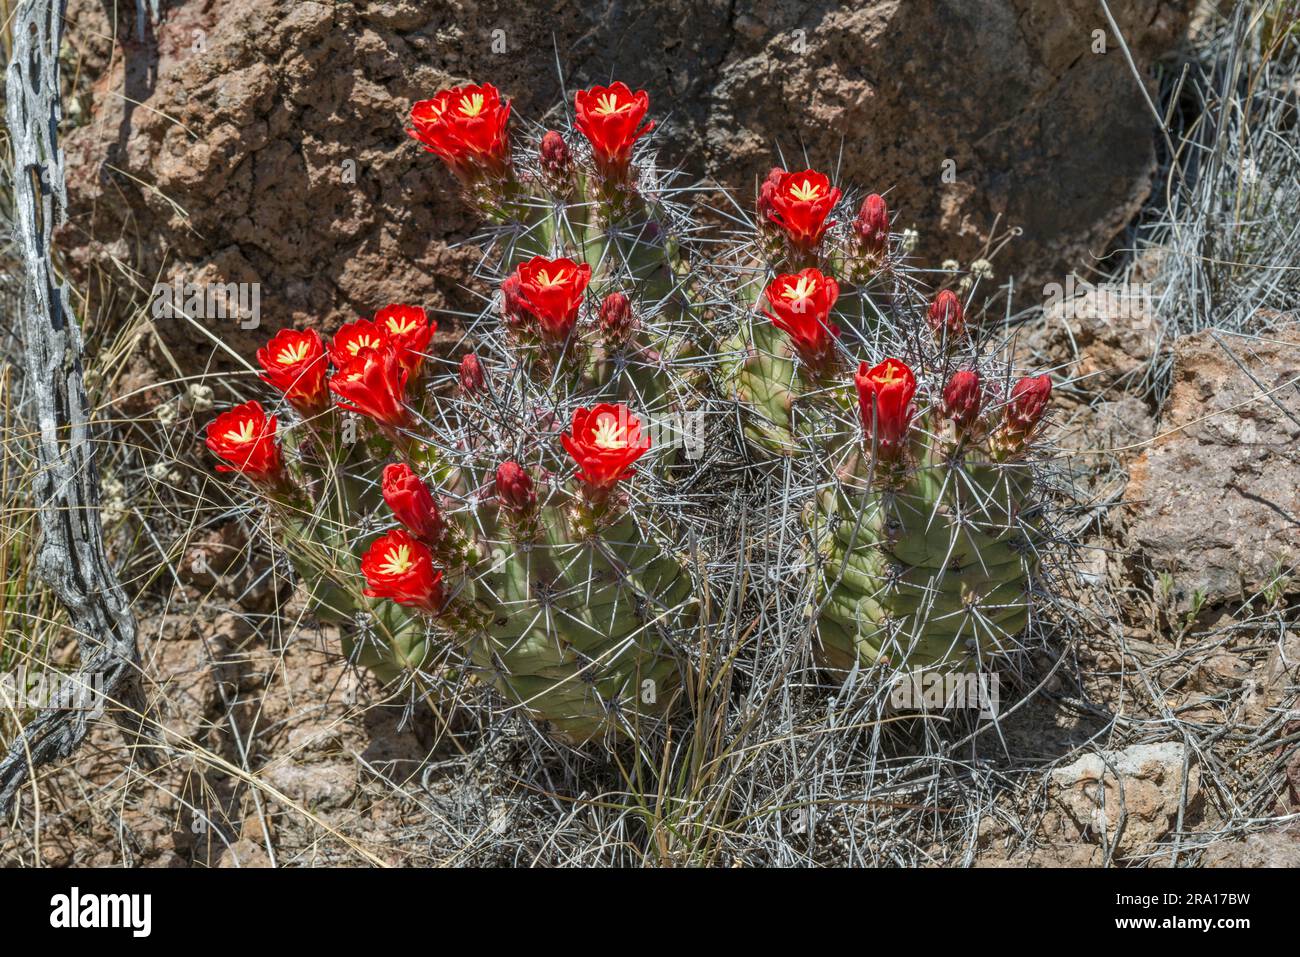 Claret cup cactus in bloom, Chihuahuan Desert, Big Bend Ranch State Park, Texas, USA Stock Photo